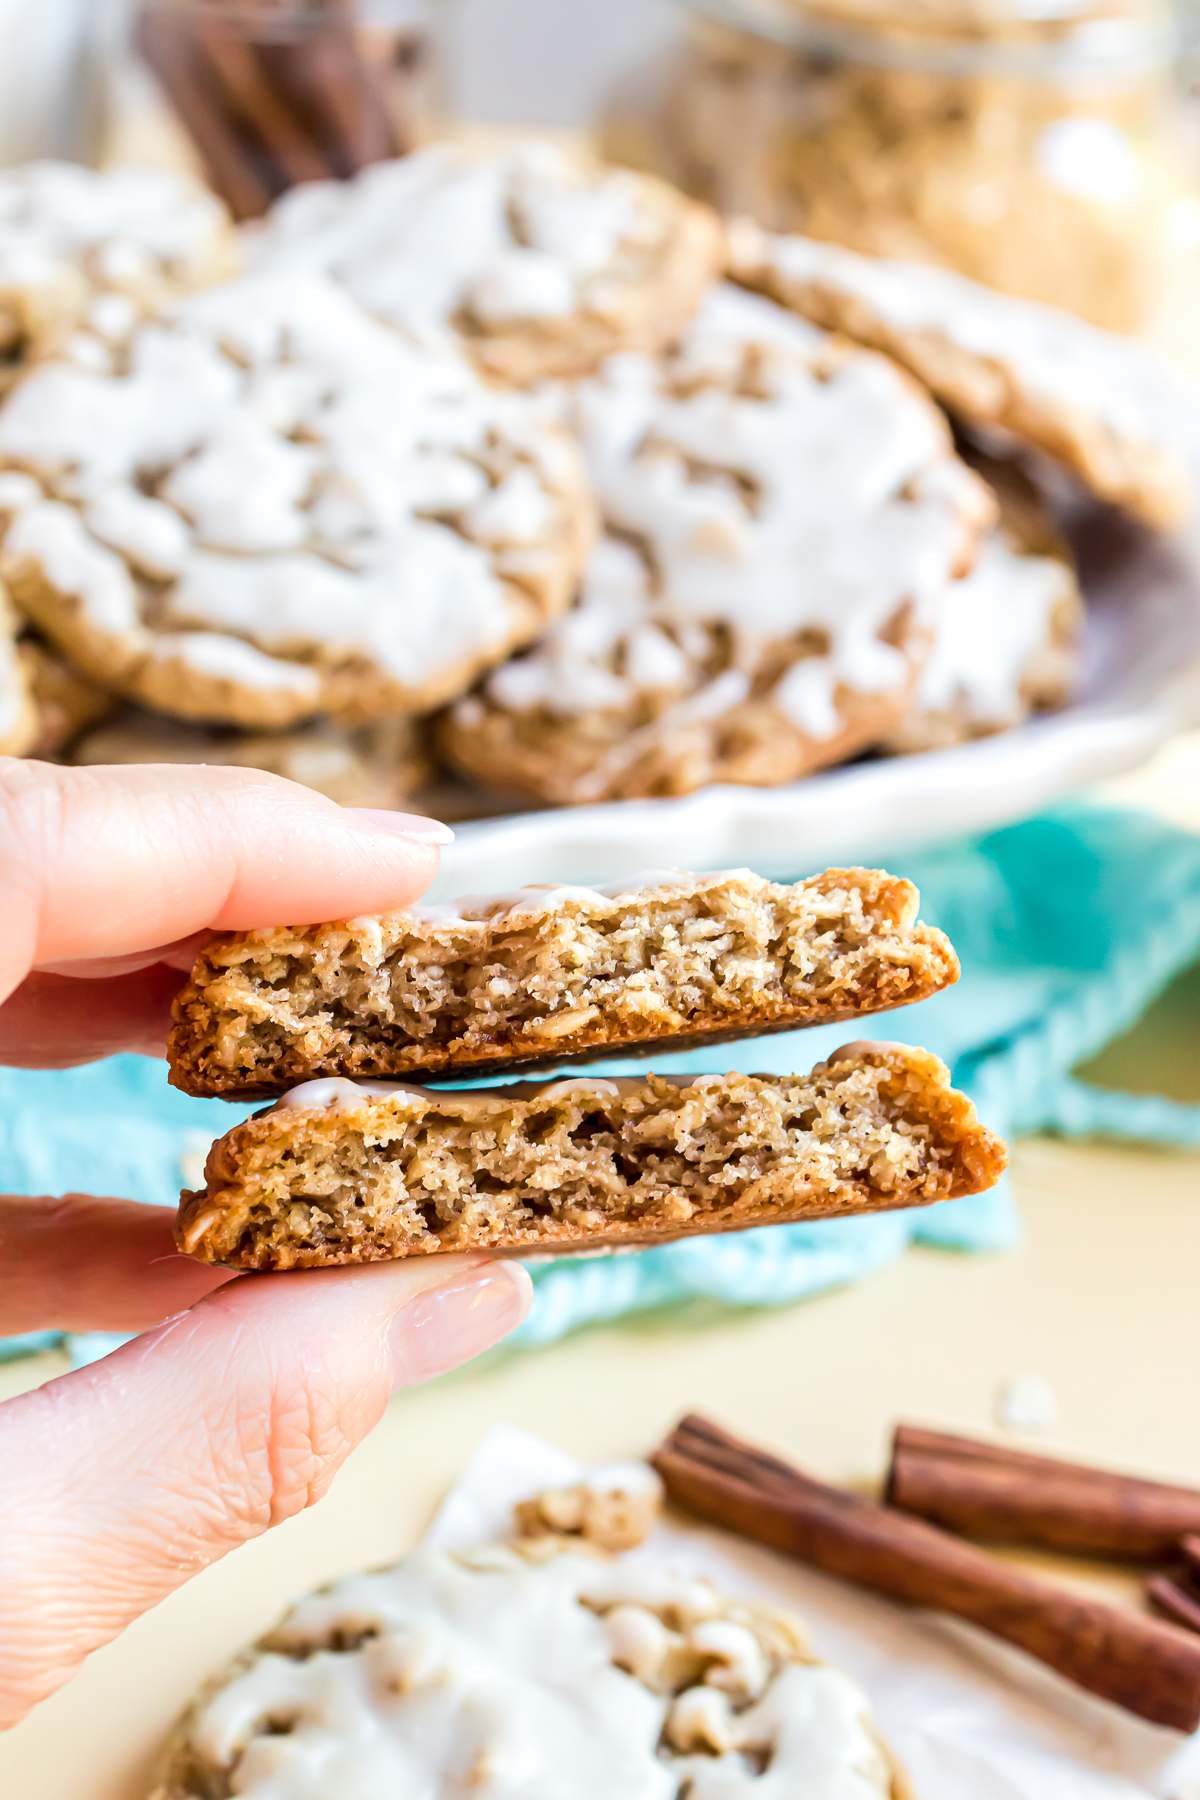 An iced oatmeal cookie broken in half and stacked on top of each other to show the inside texture of the cookie. It is golden brown, pieces of oats can be seen inside the cookie, and a little icing is peeking out from the cookies' tops. A platter of cookies is in the background.